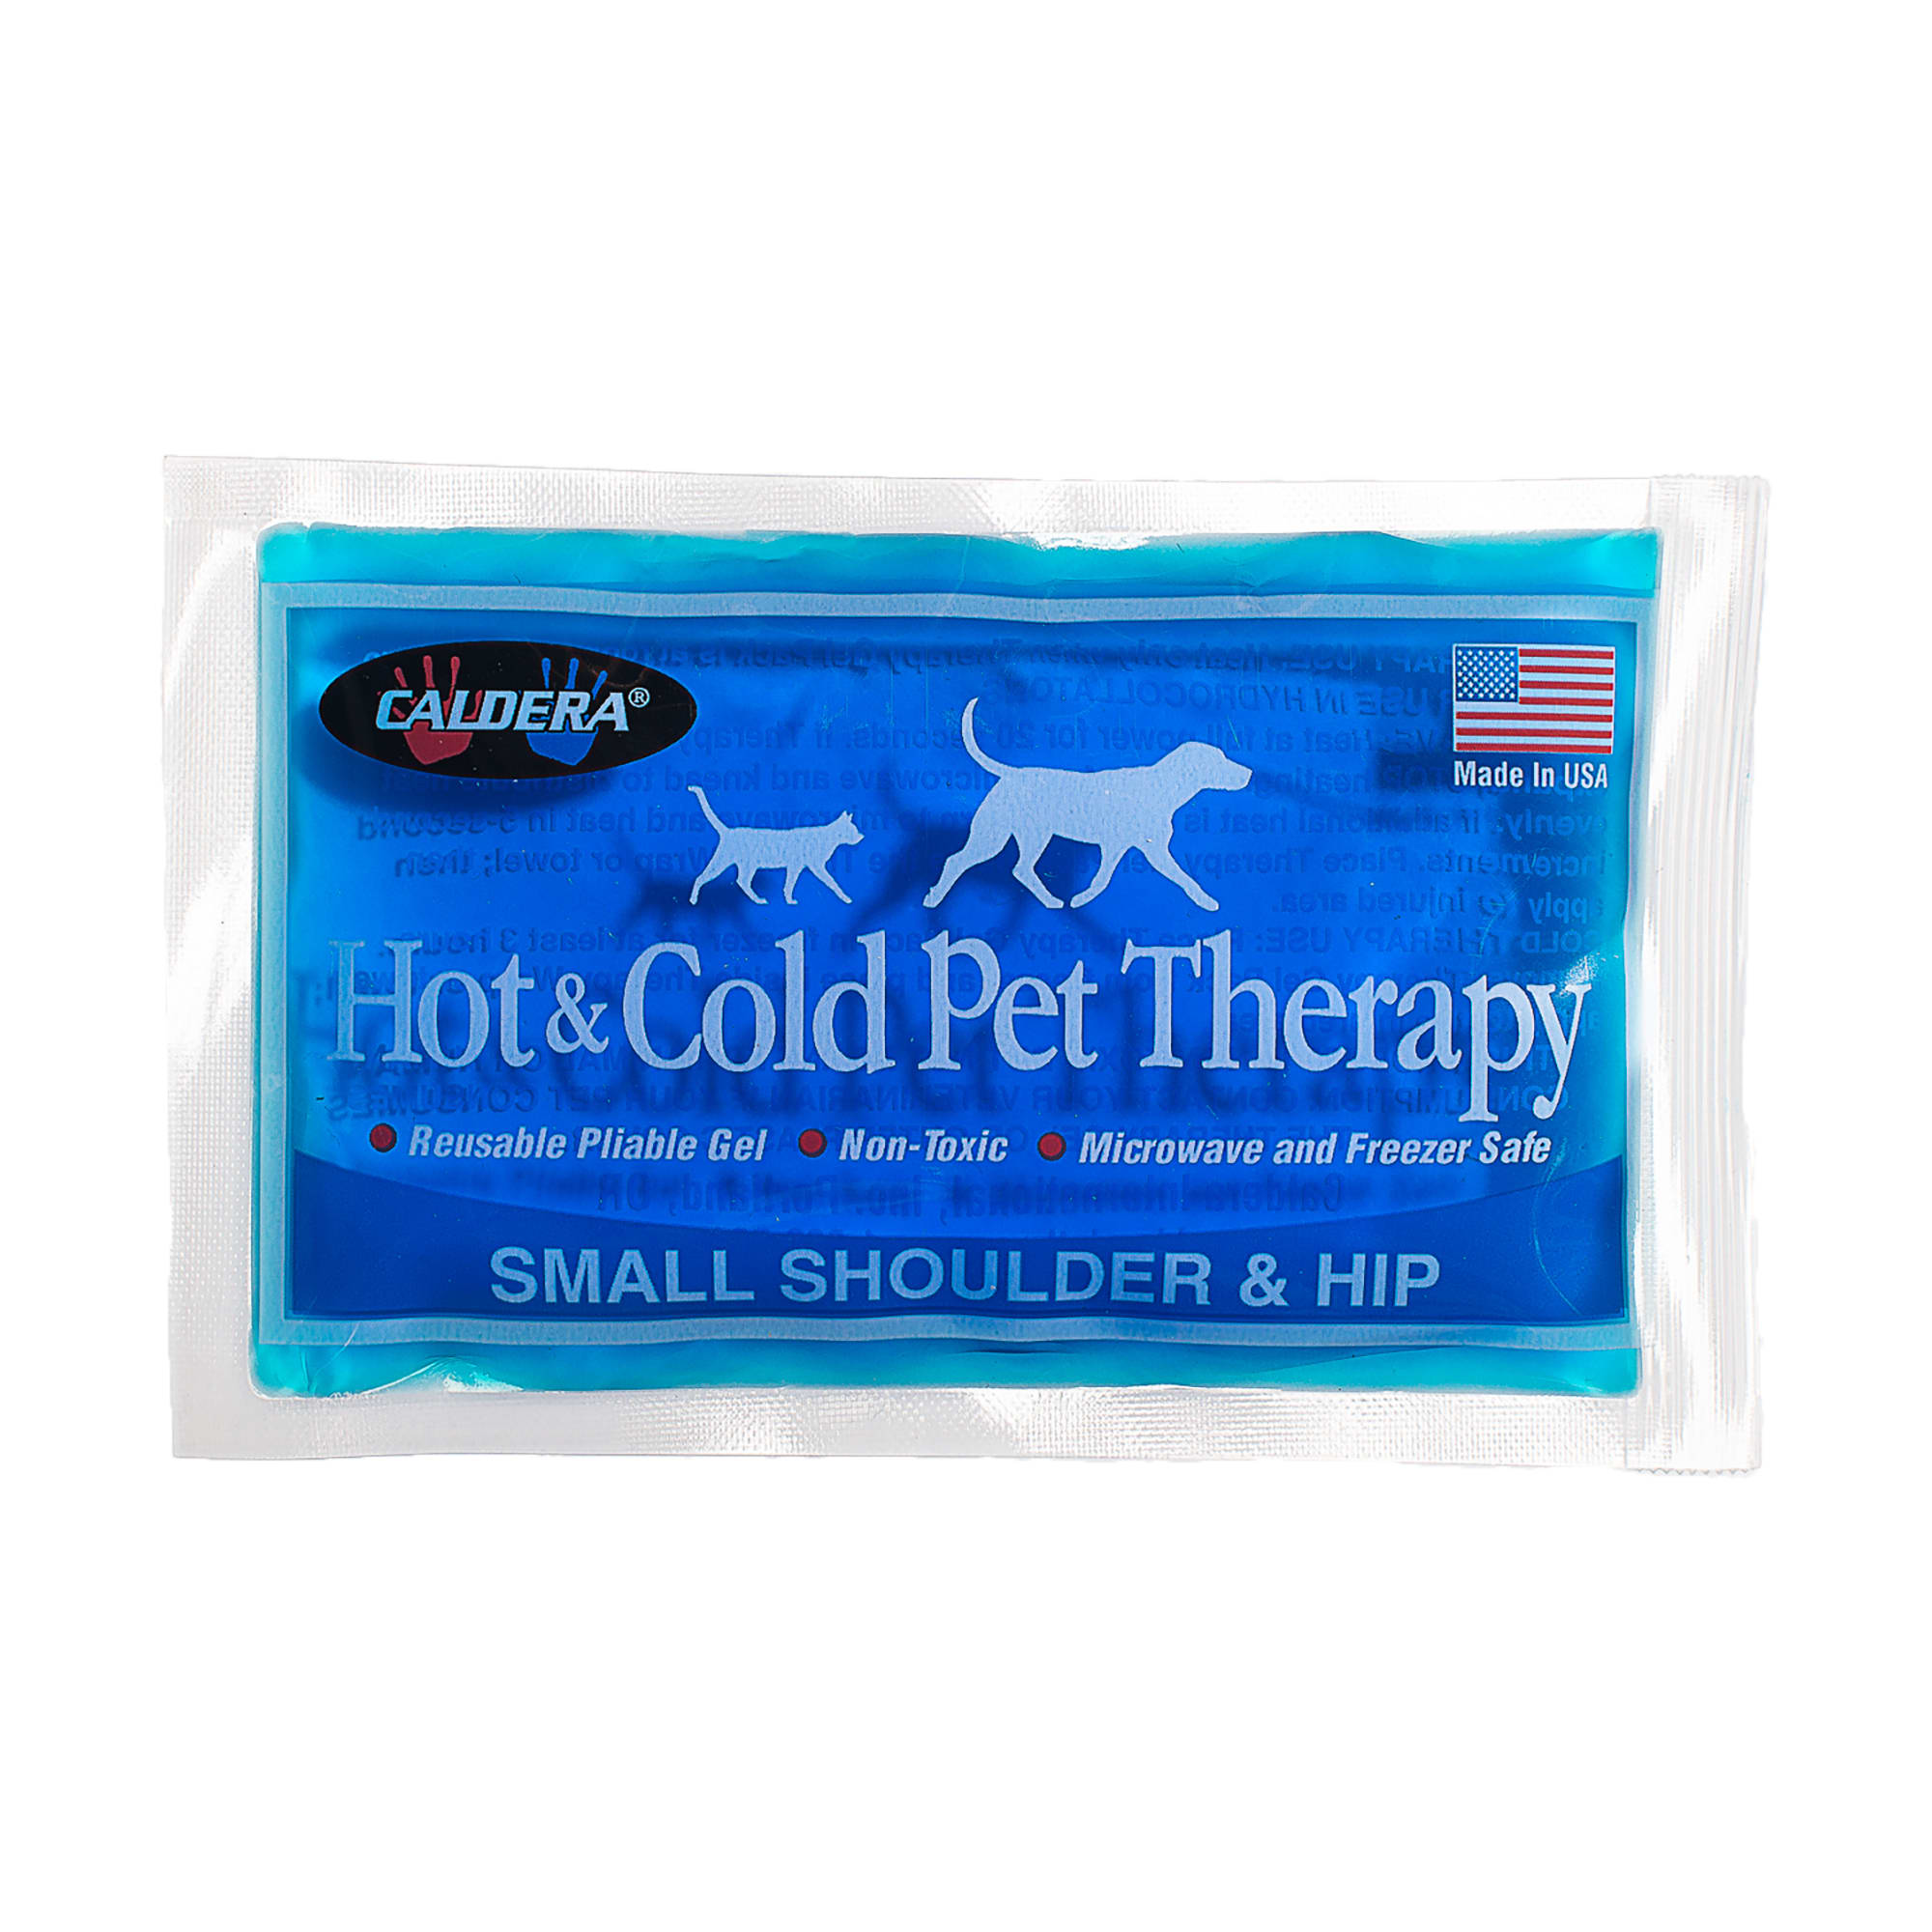 Heat Wraps - Warm Up Animals - Heat Therapy Products